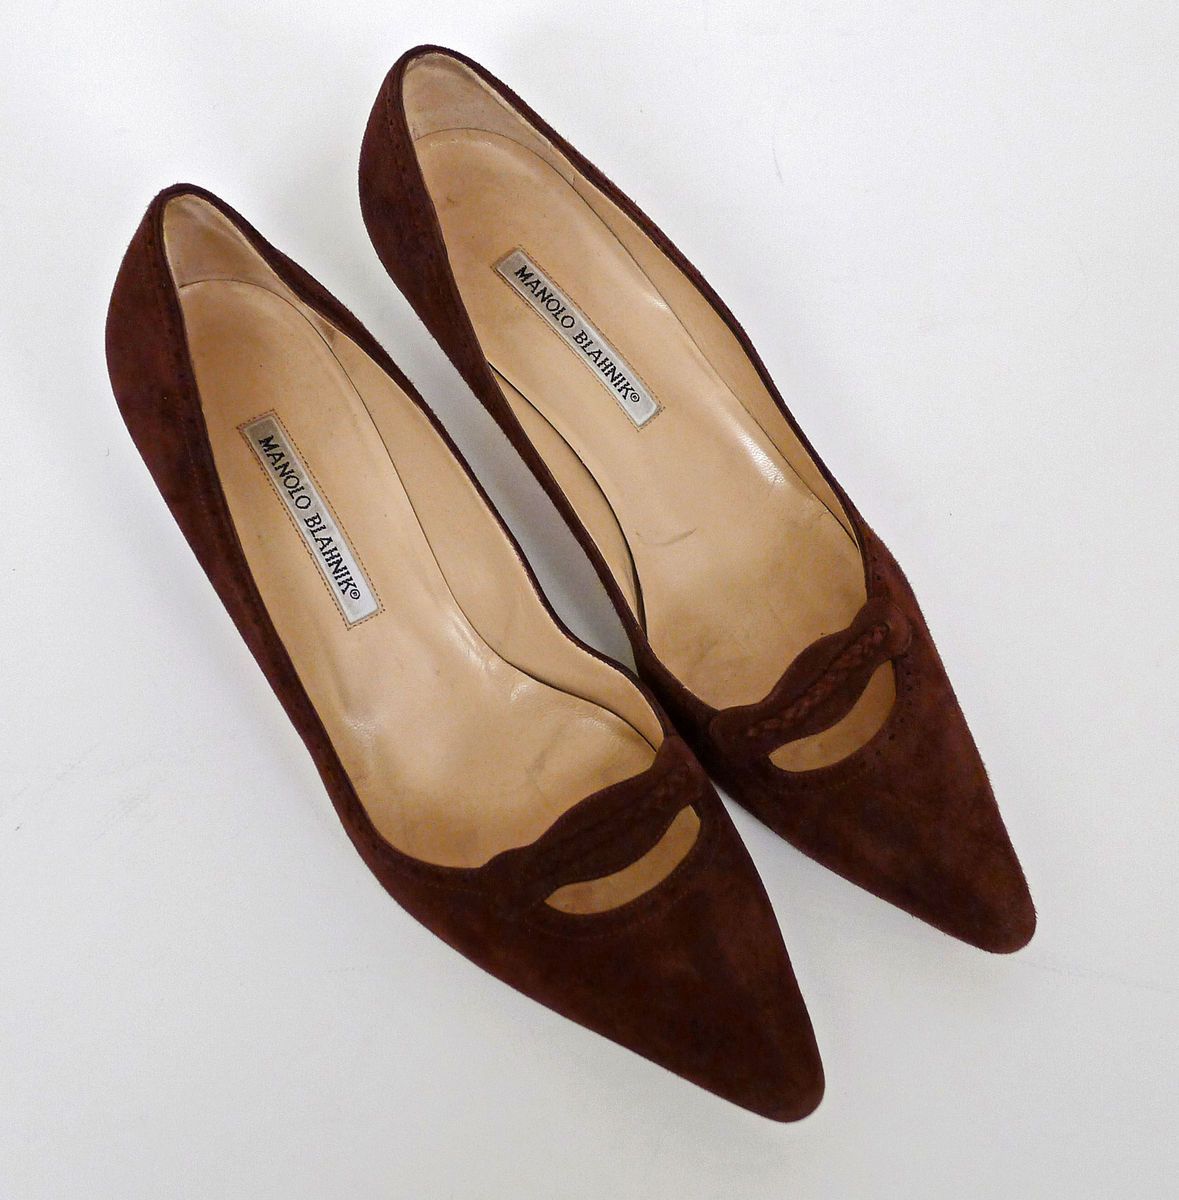 Manolo Blahnik Brown Suede Heels with Cut Out and Perforated Details